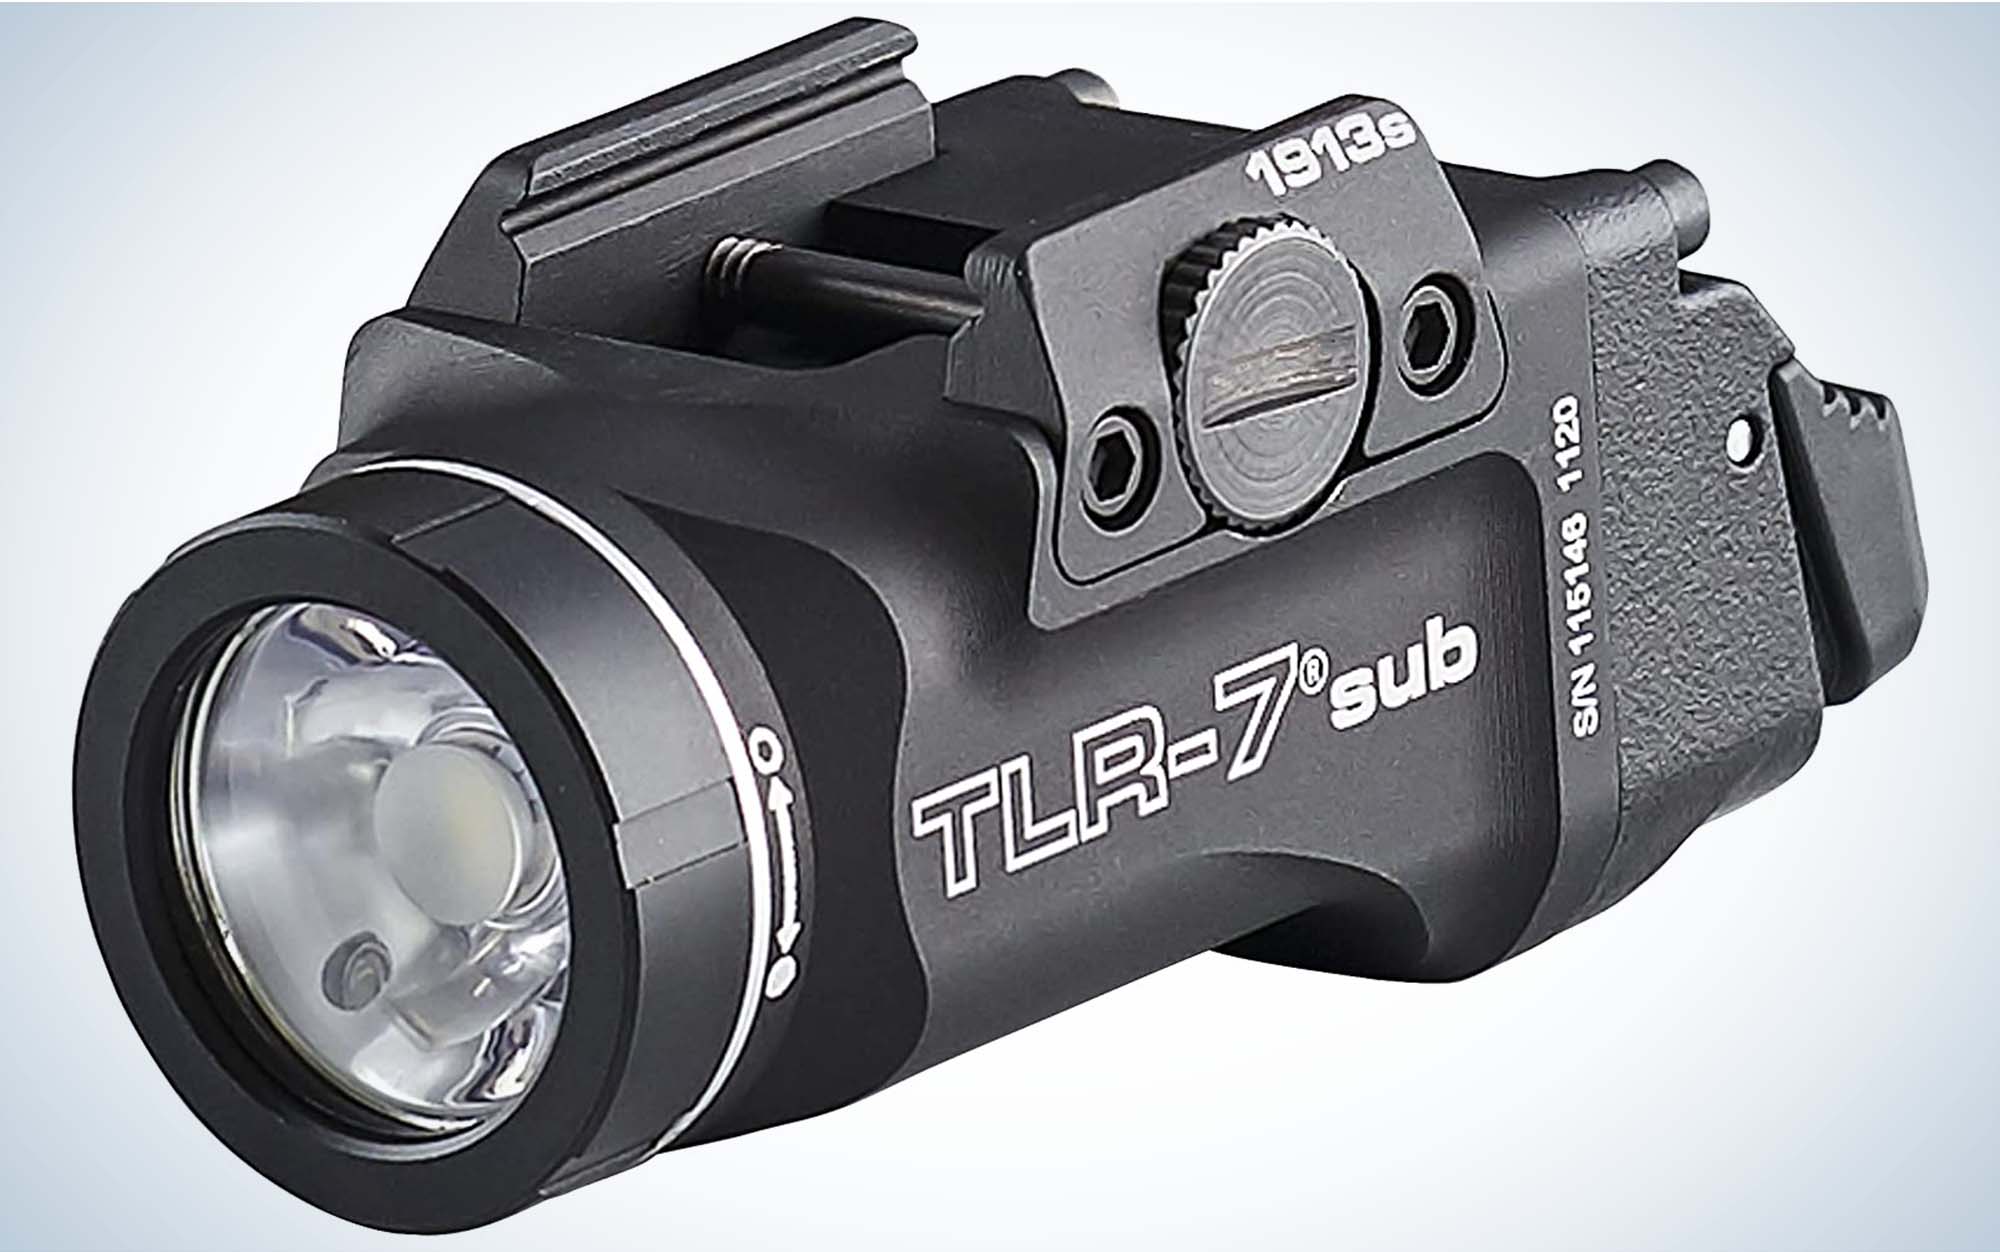 The Streamlight TLR-7 Sub is the best pistol light for EDC.